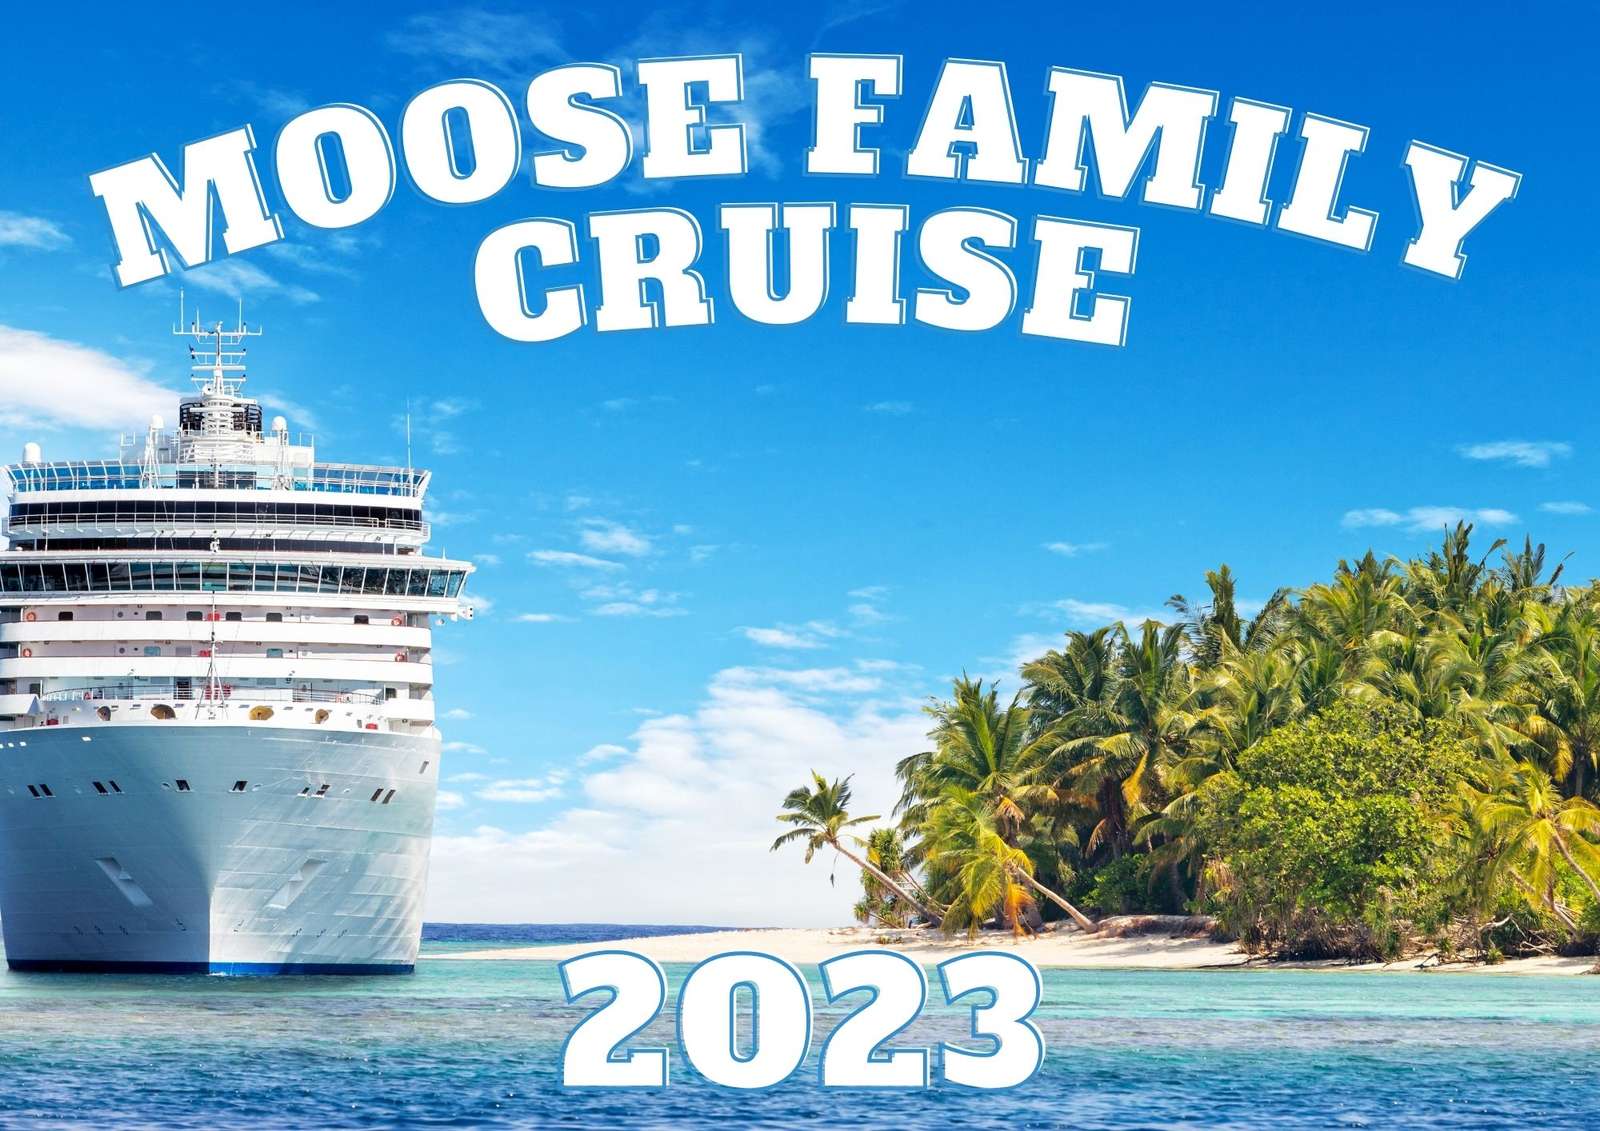 Moose Family Cruise 2023 puzzle online from photo